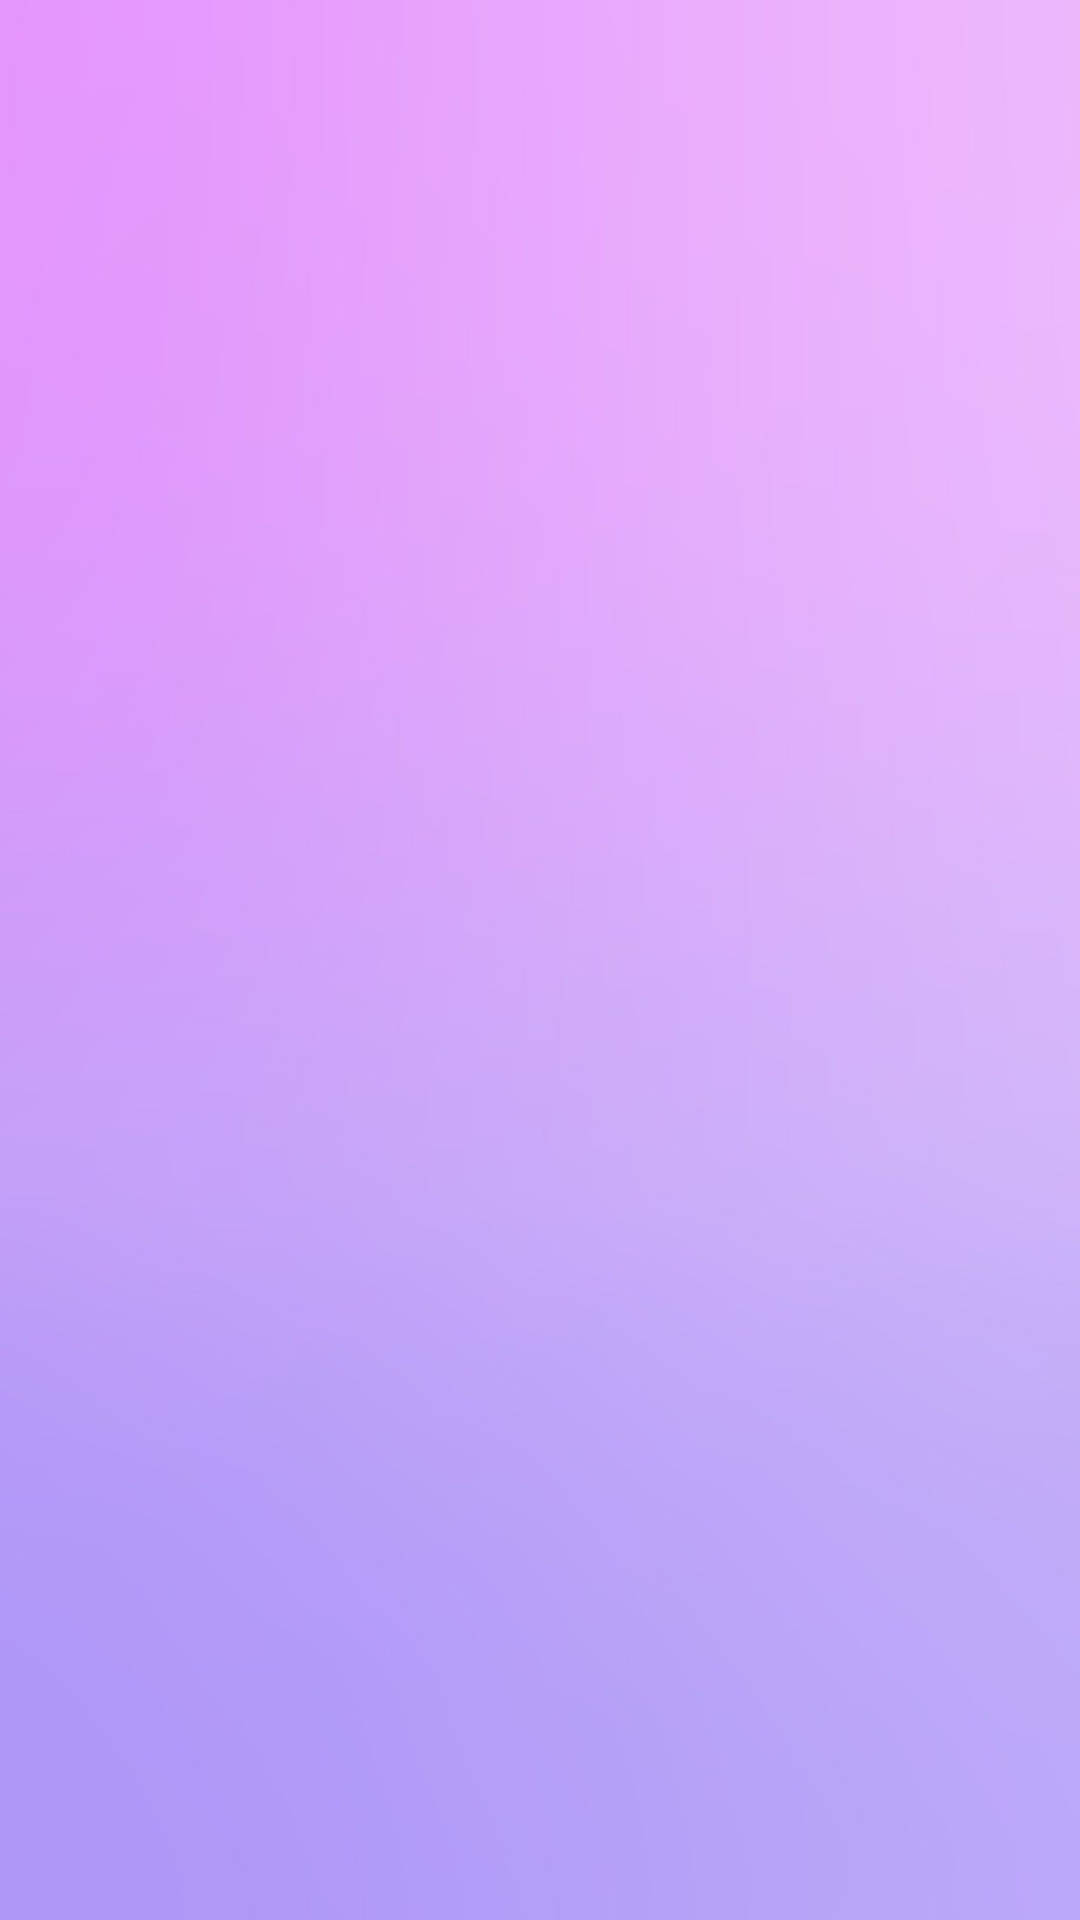 Gradient Of Lavender To Light Purple Iphone Background